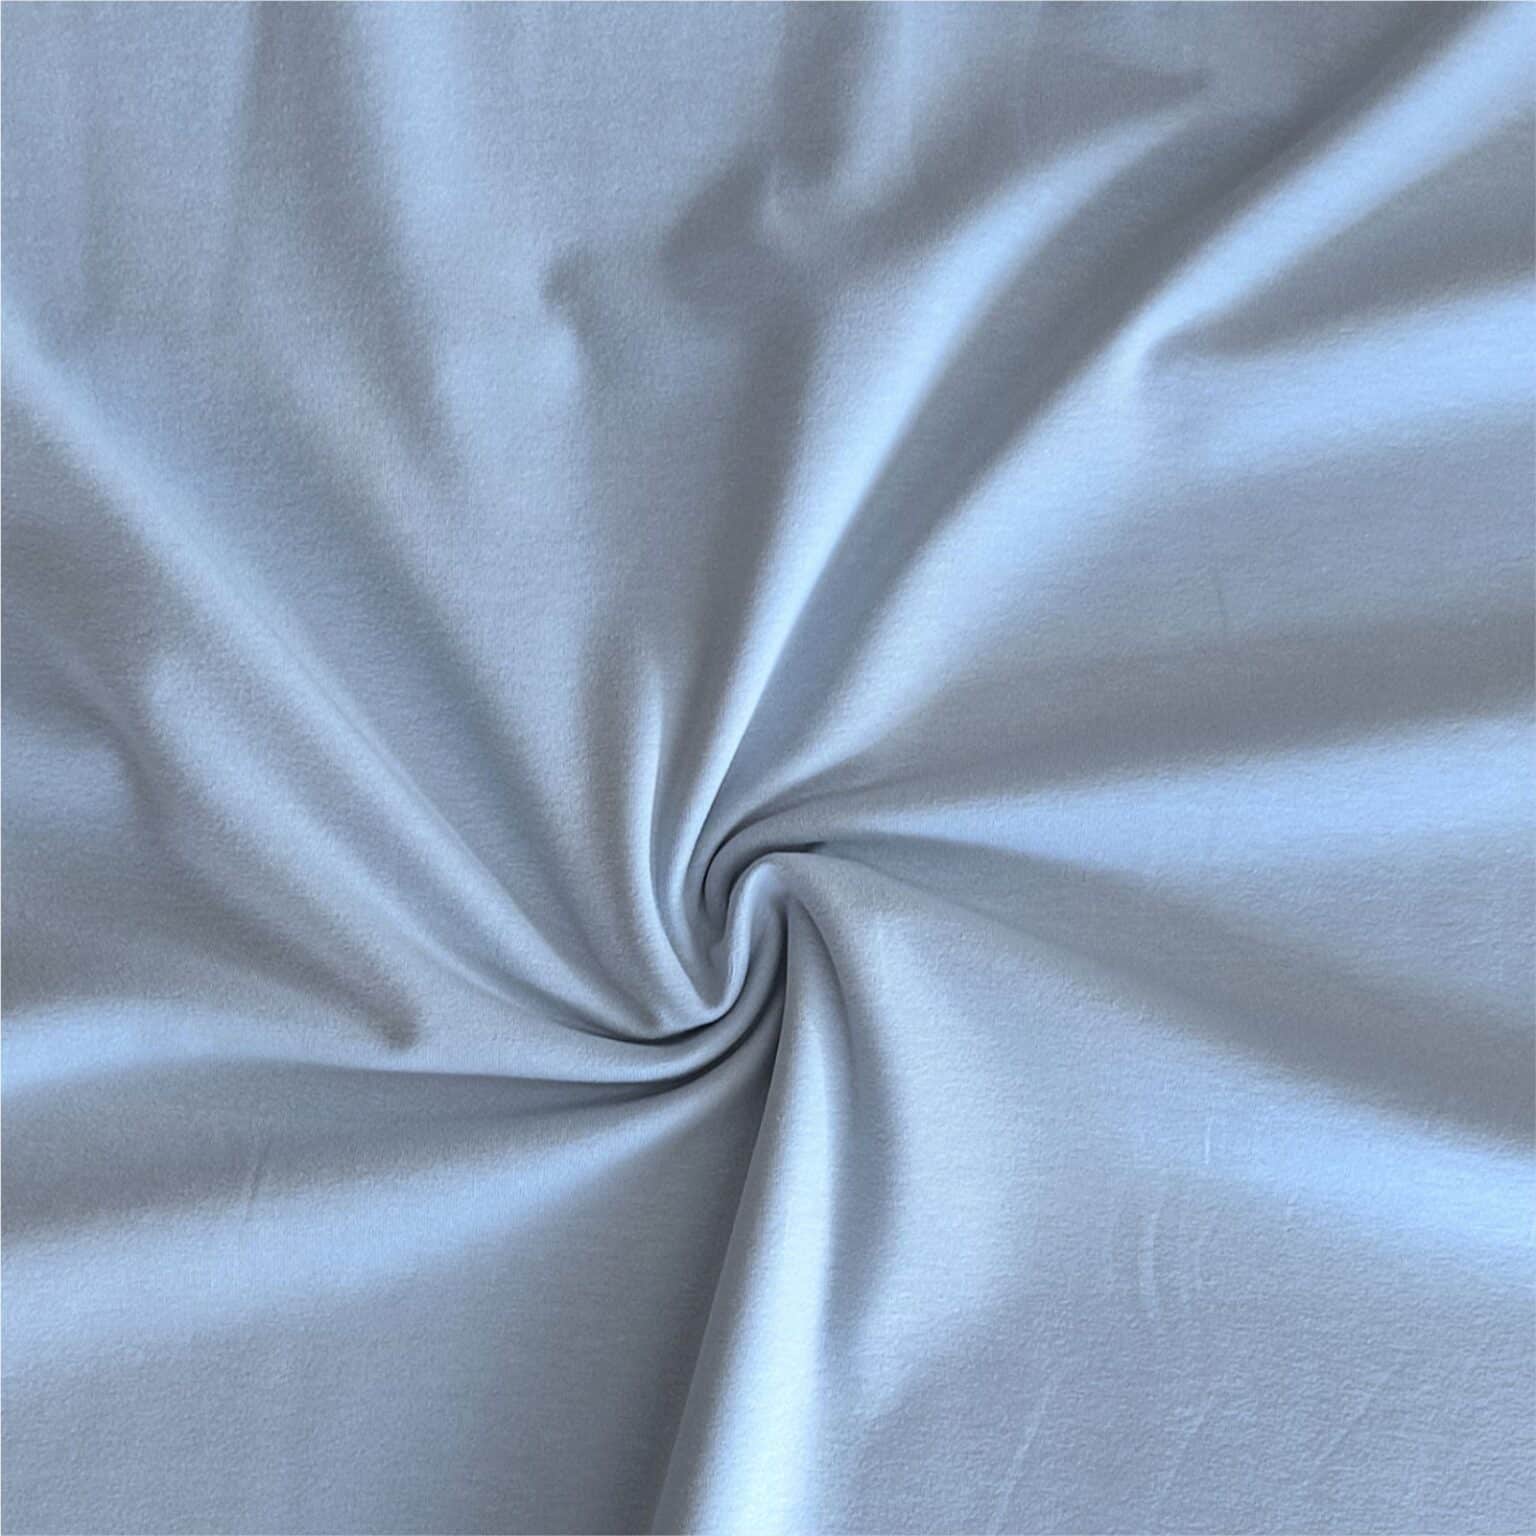 pale blue plain cotton jersey fabric | More Sewing